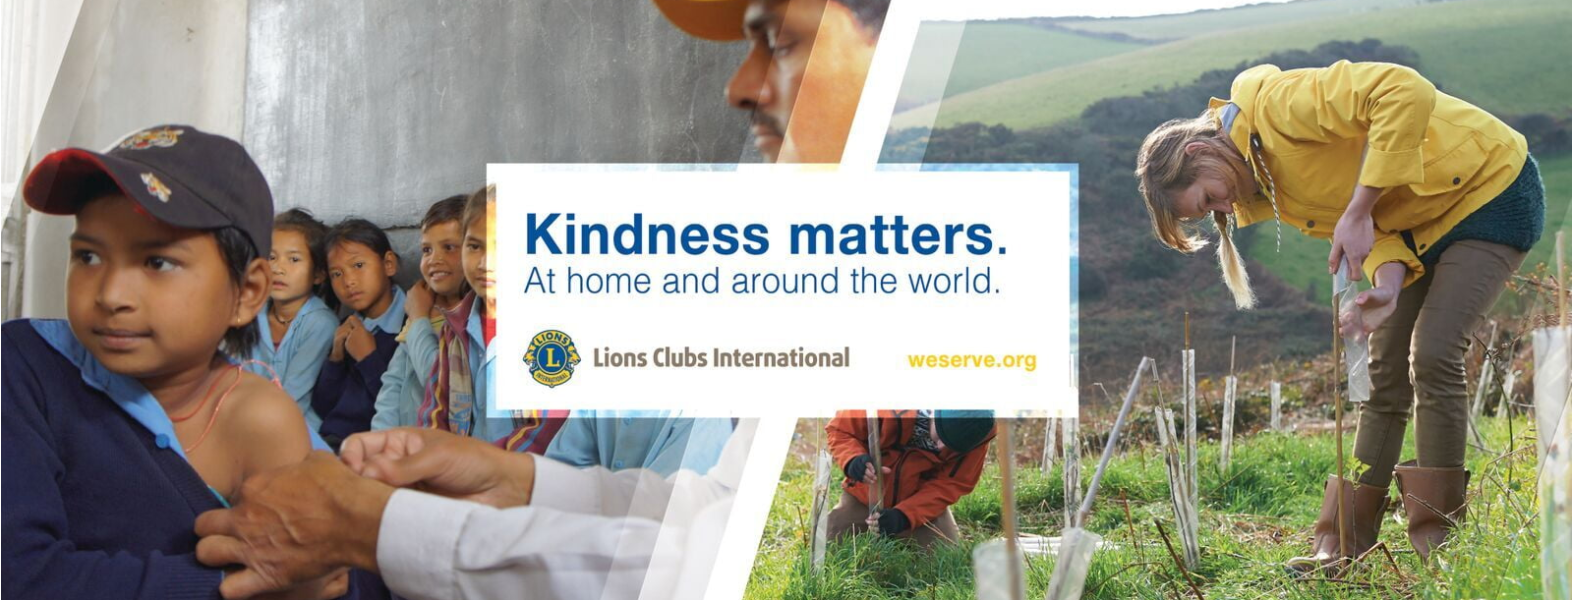 Kindness matters. Lions believe that Kindness can change the world. 